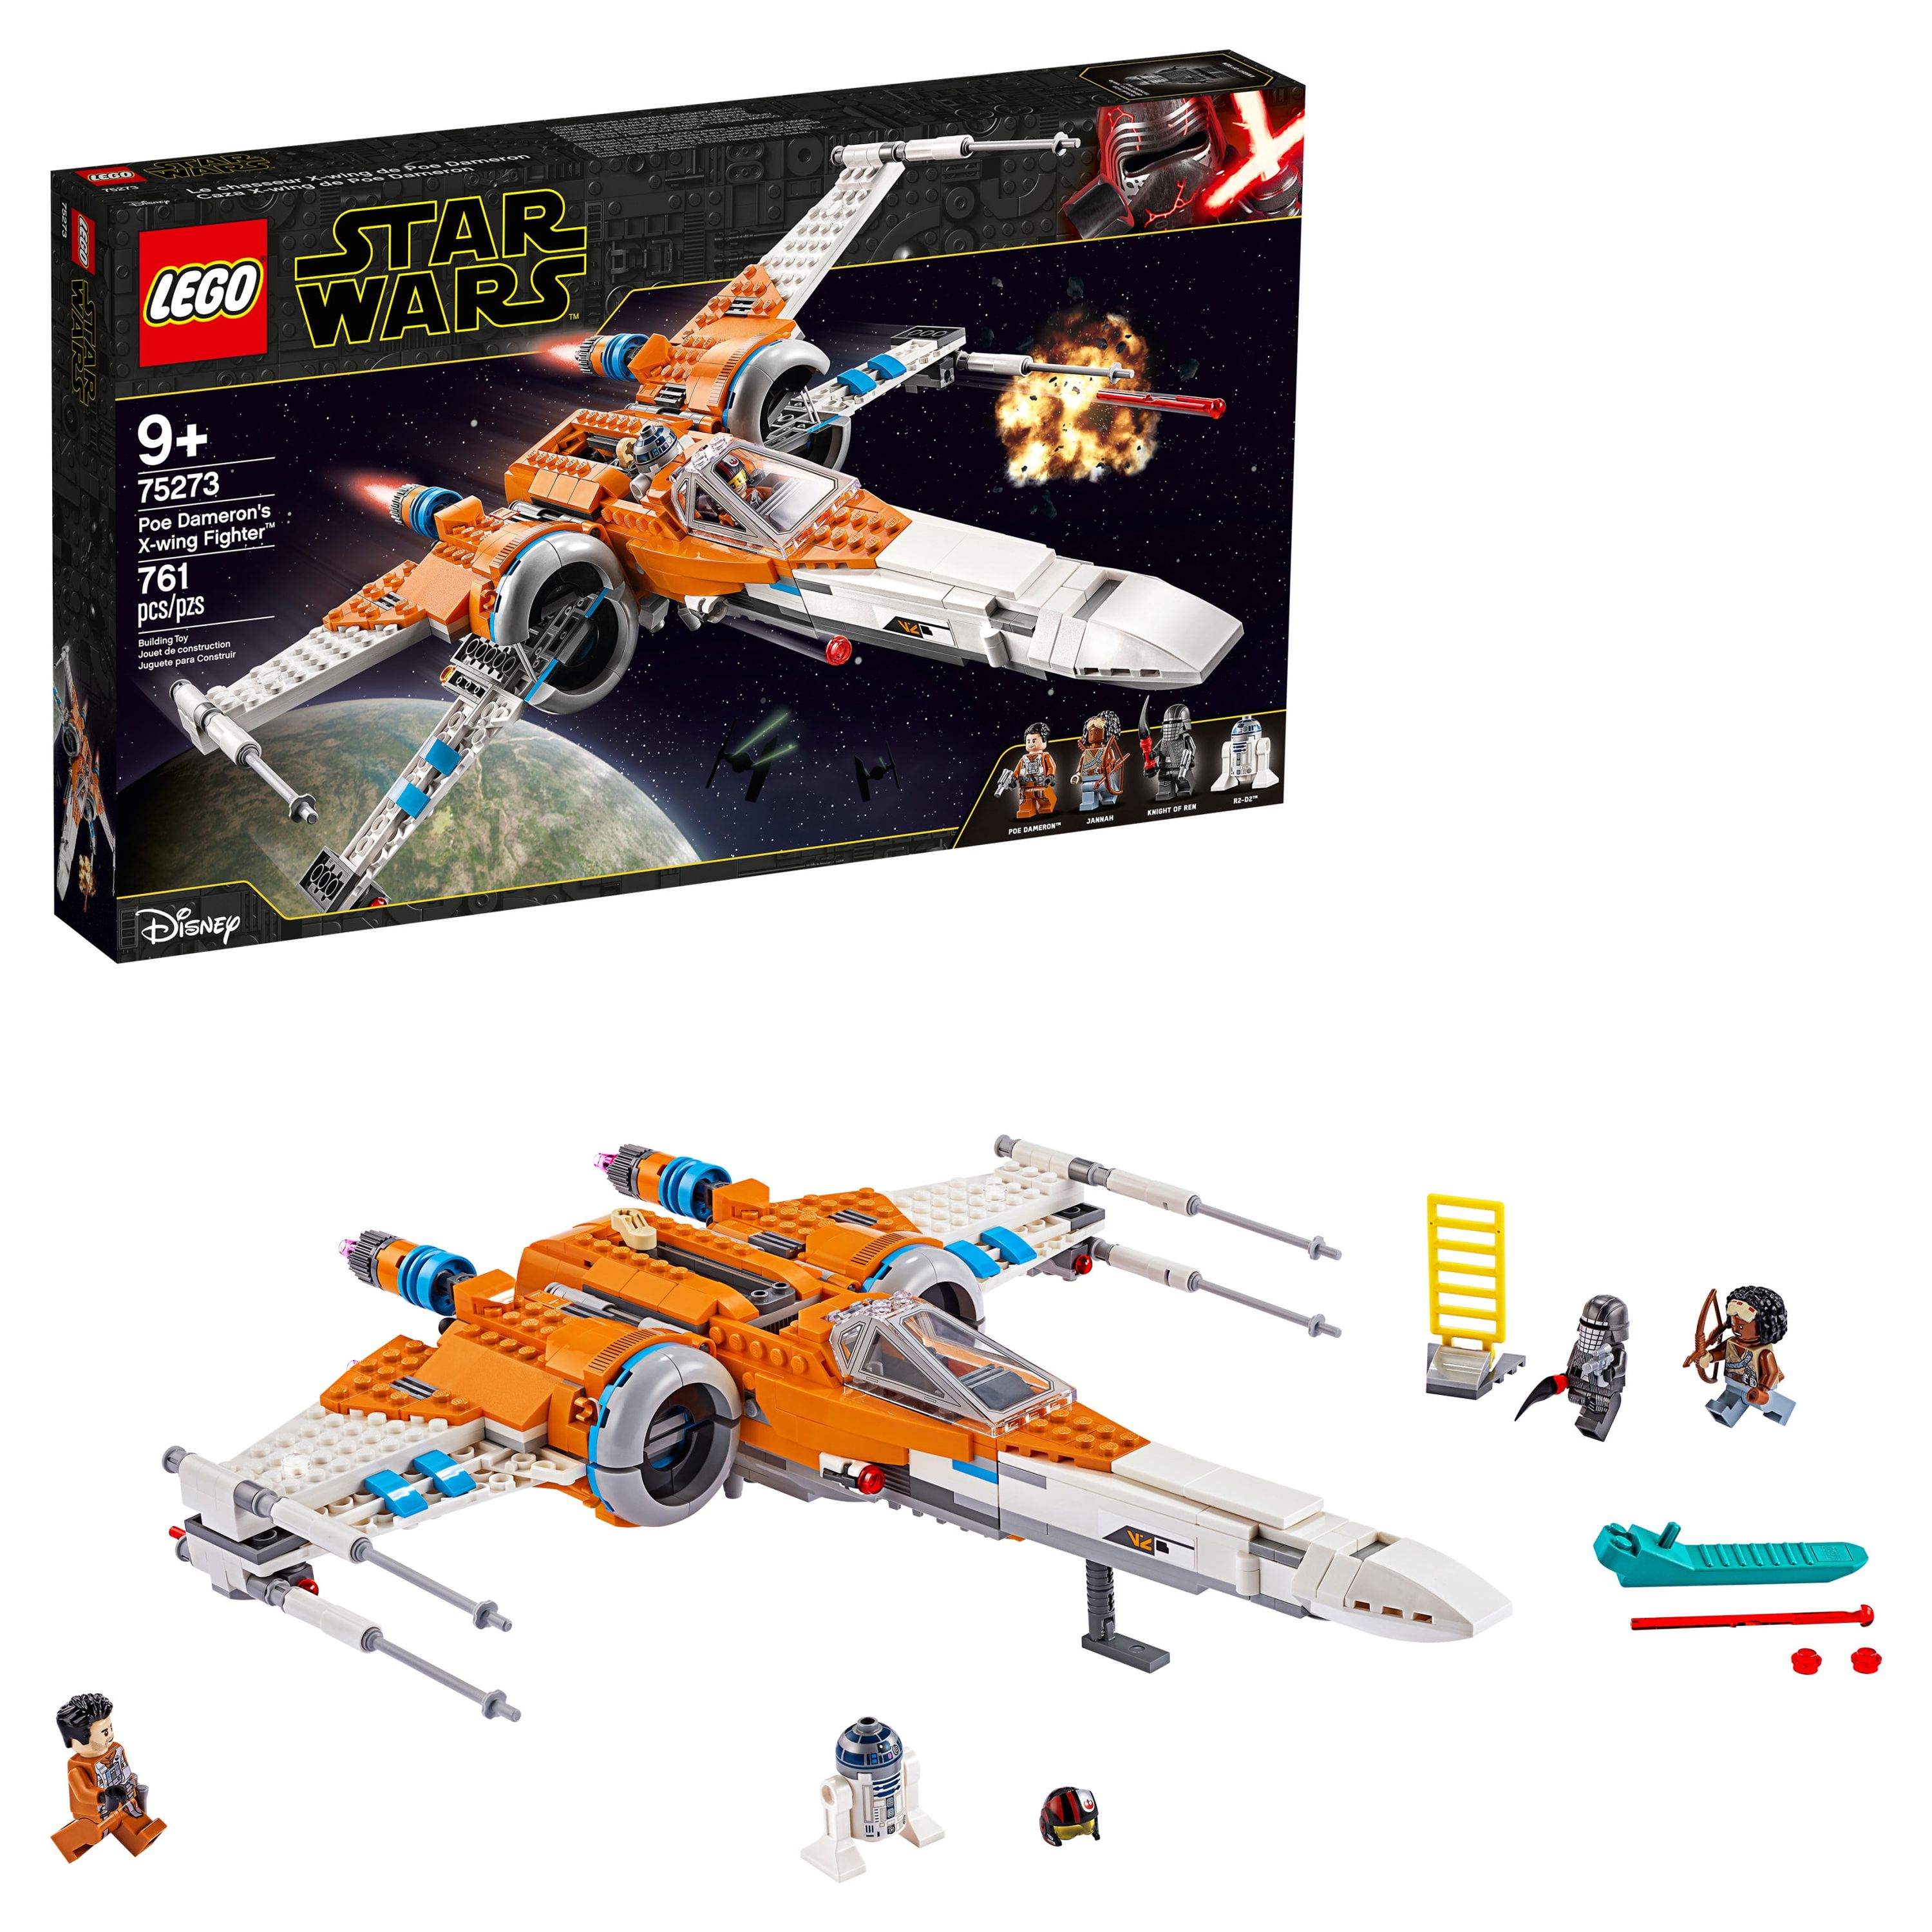 LEGO 75273 Star Wars Poe Dameron's X-wing Fighter Building Kit, 761 Pieces - image 1 of 7